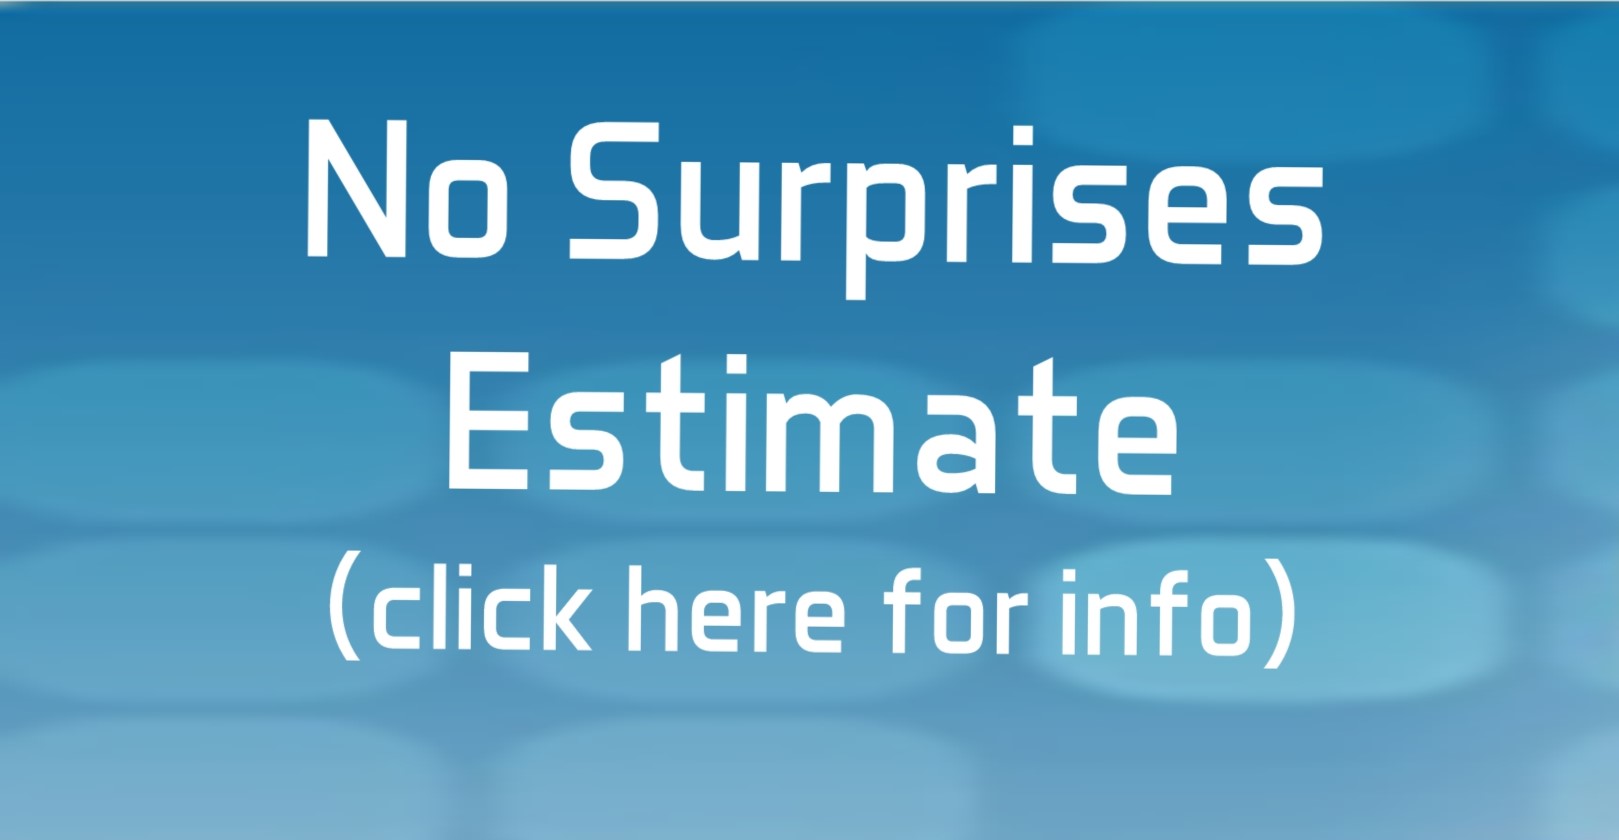 Clickable blue box with white writing that says "No Surprises Estimate (click here for info)" so clients can see how Long Beach Therapy is complying with No Surprises Act.